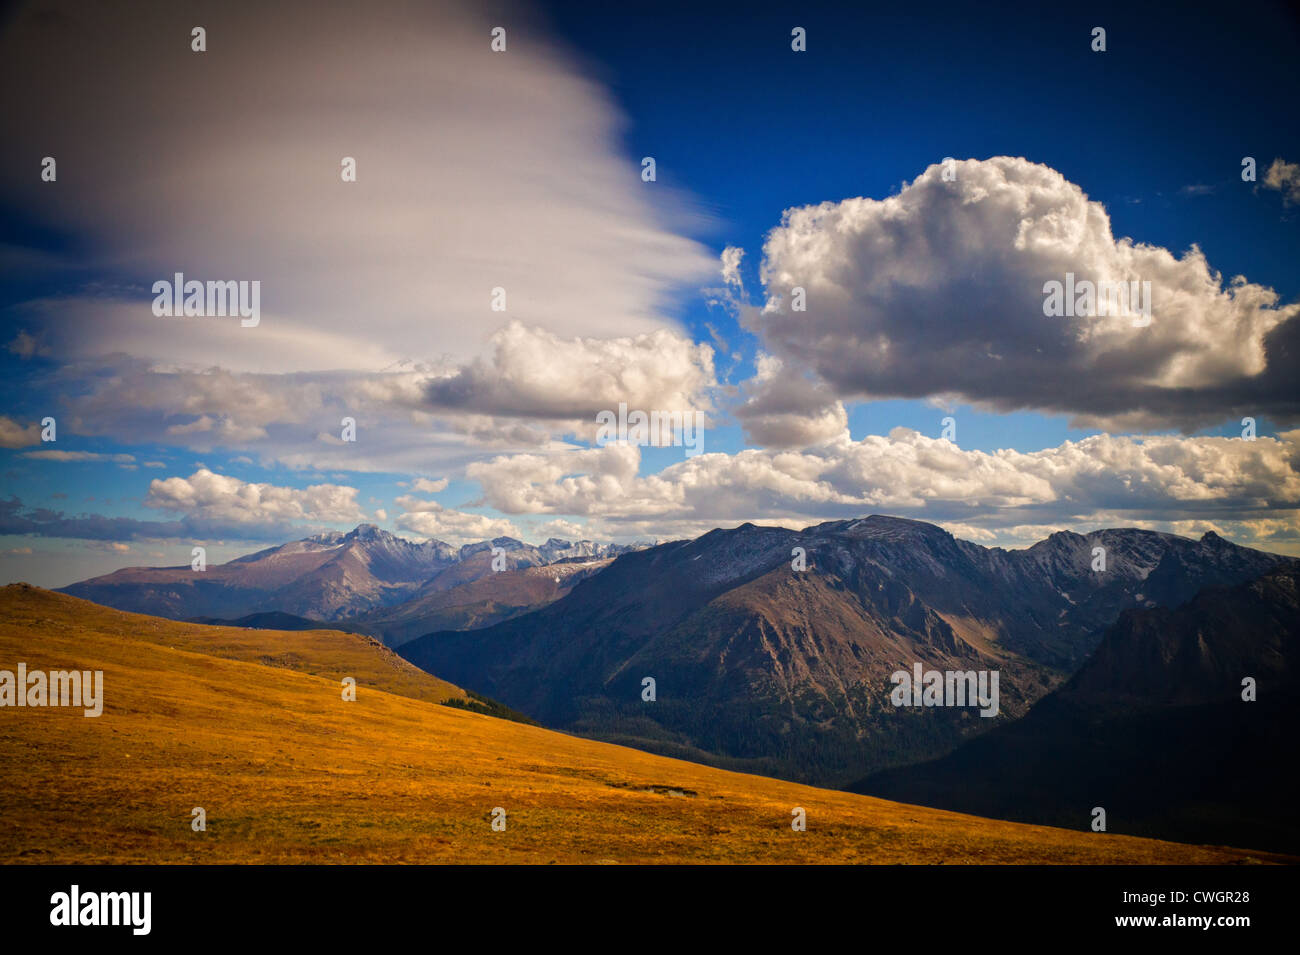 Longs Peak touches the clouds along the alpine tundra areas of Rocky Mountain National Park, Colorado on beautiful Fall day Stock Photo